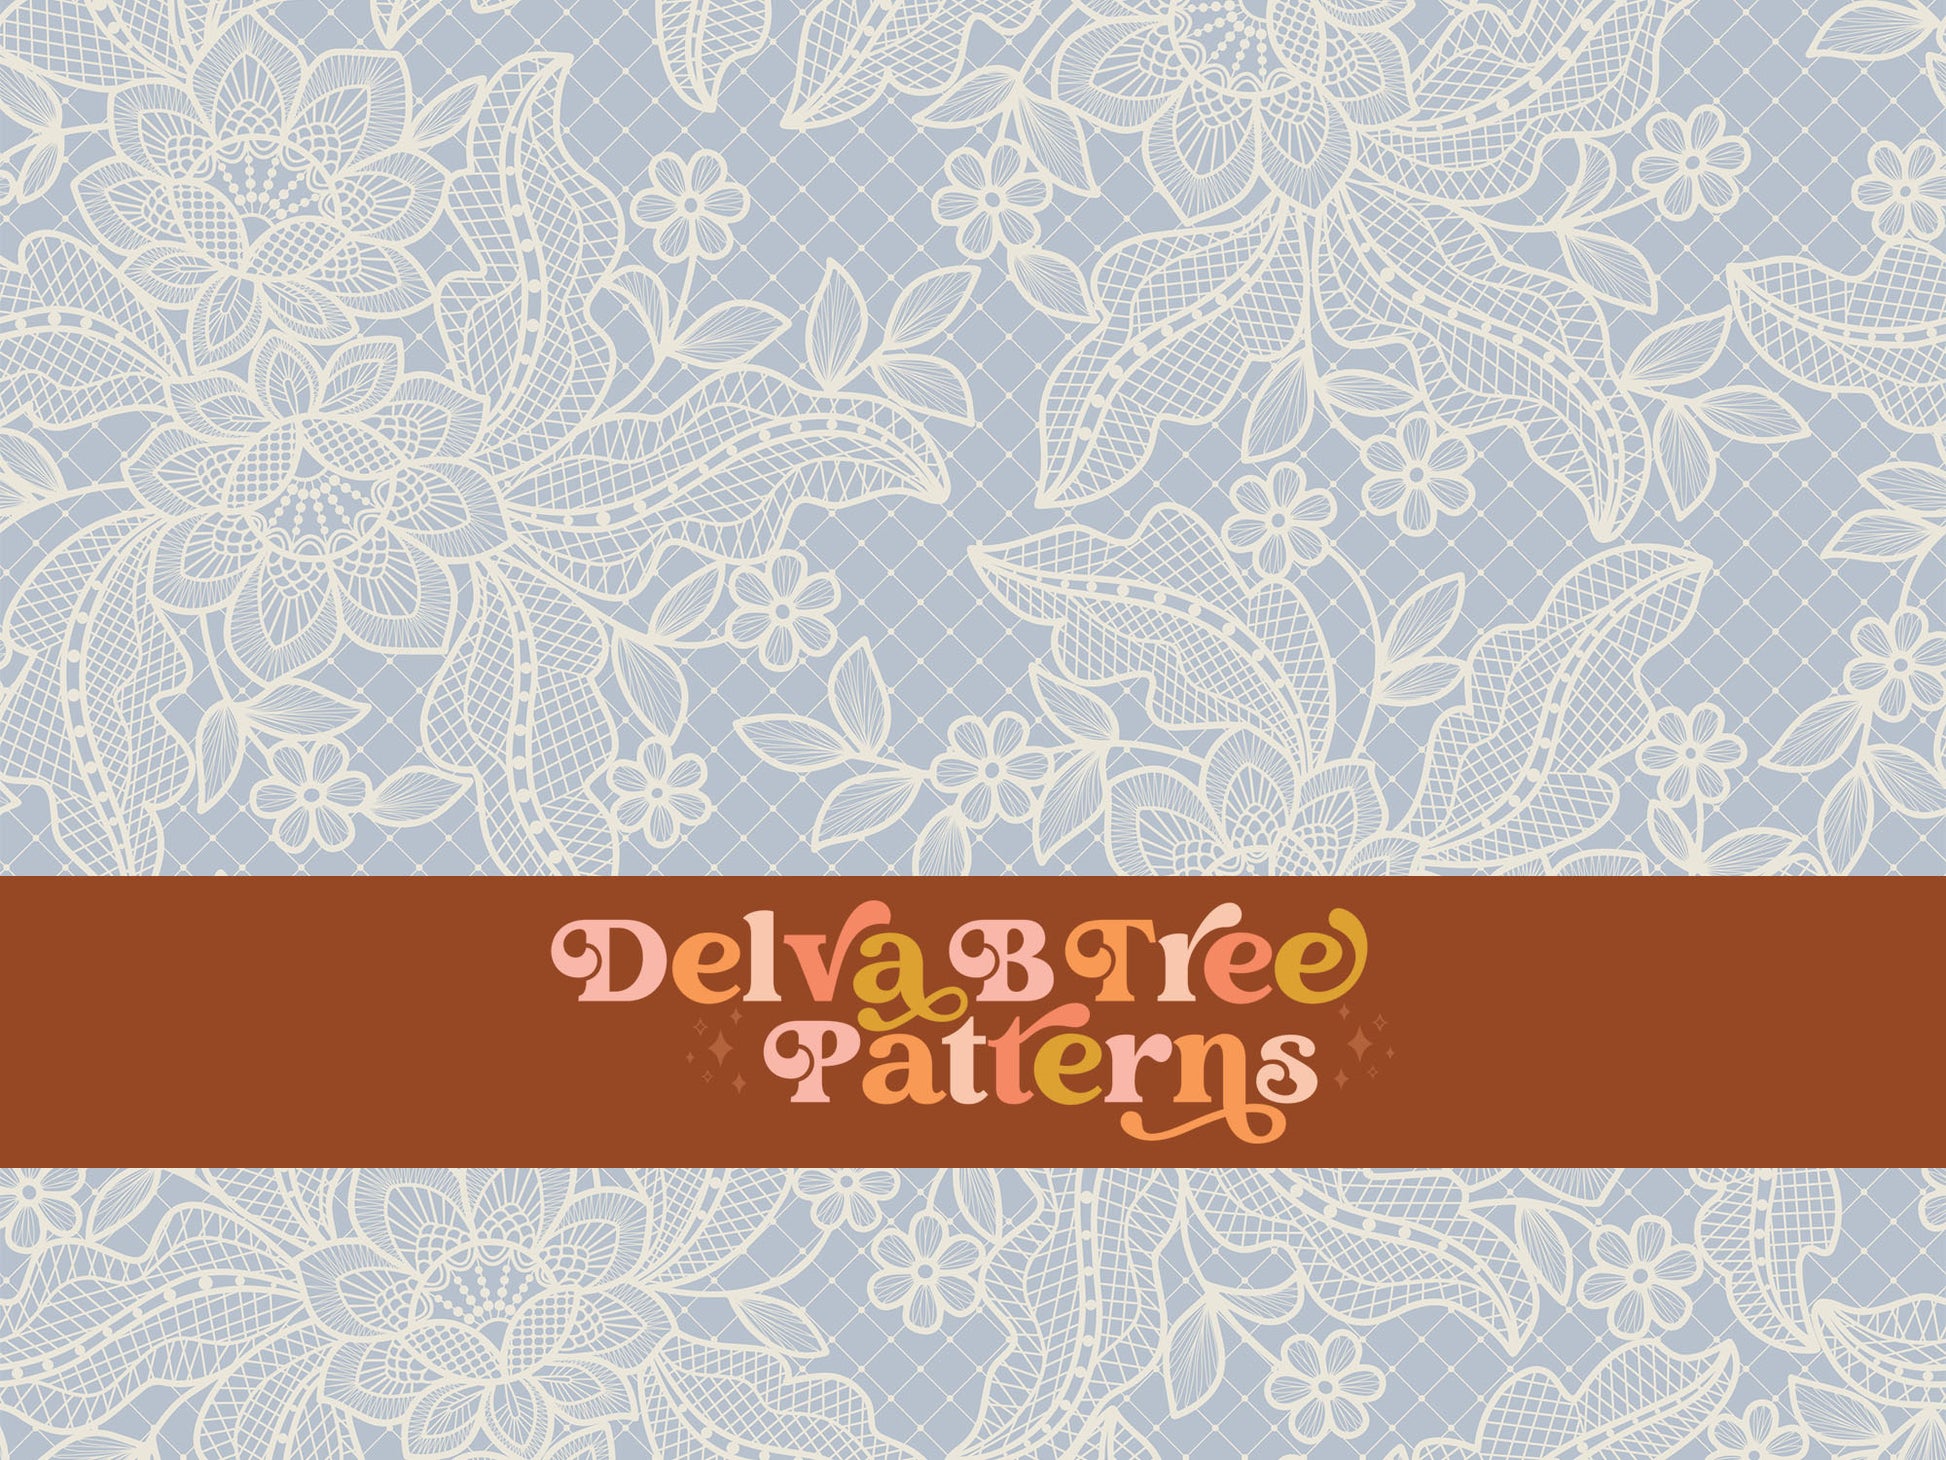 This Seamless Lace Pattern is Delicate and Pretty